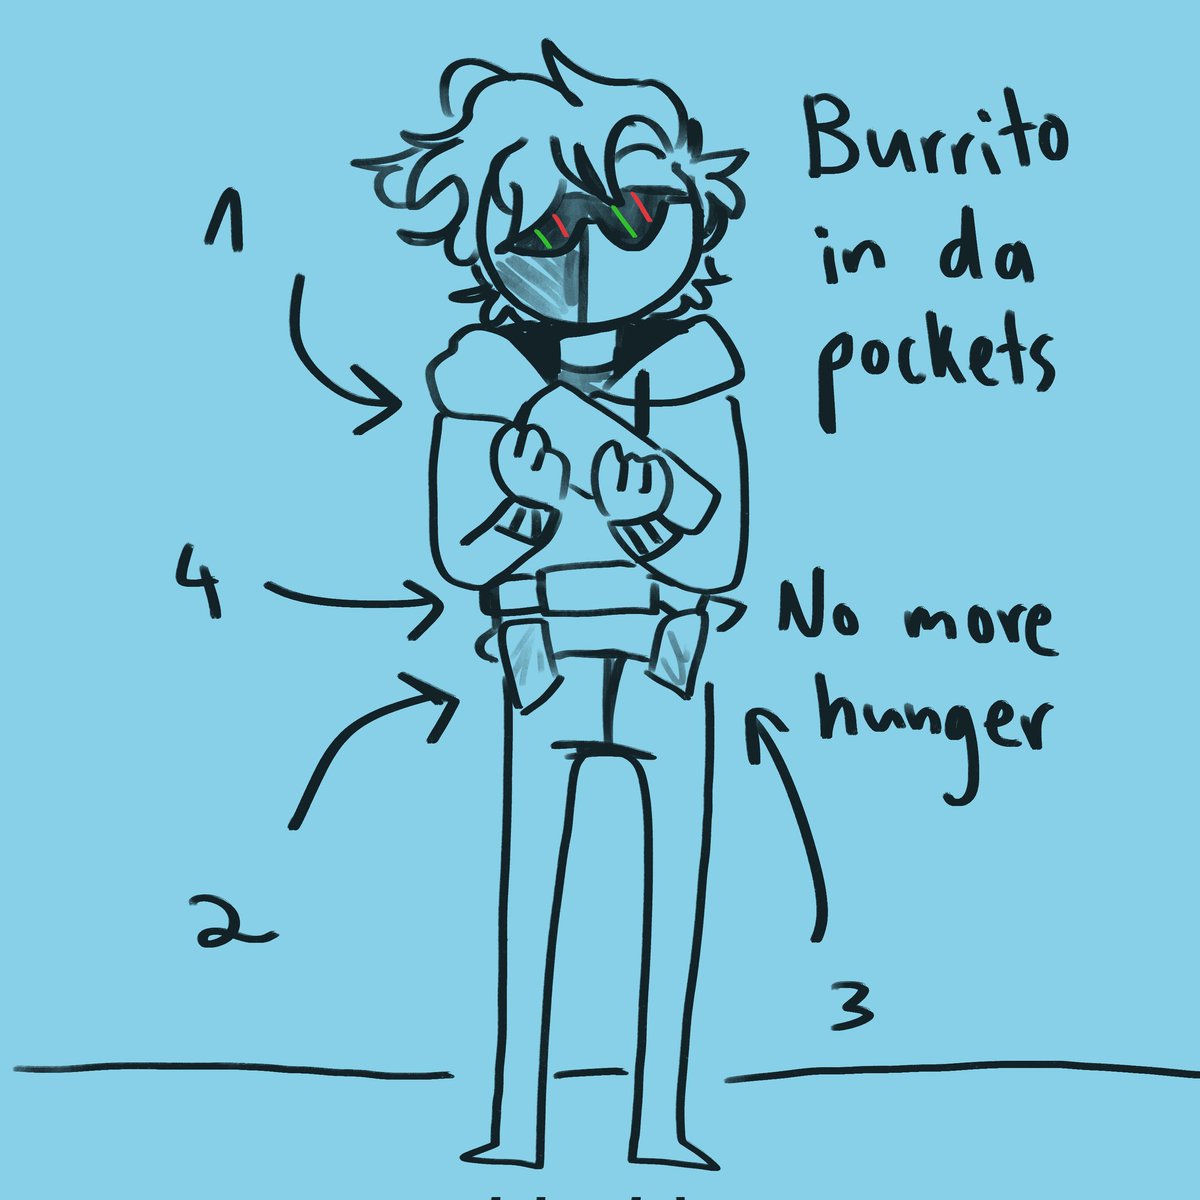 controversial, but i support ranboo and his burrito pockets
#ranboofanart 